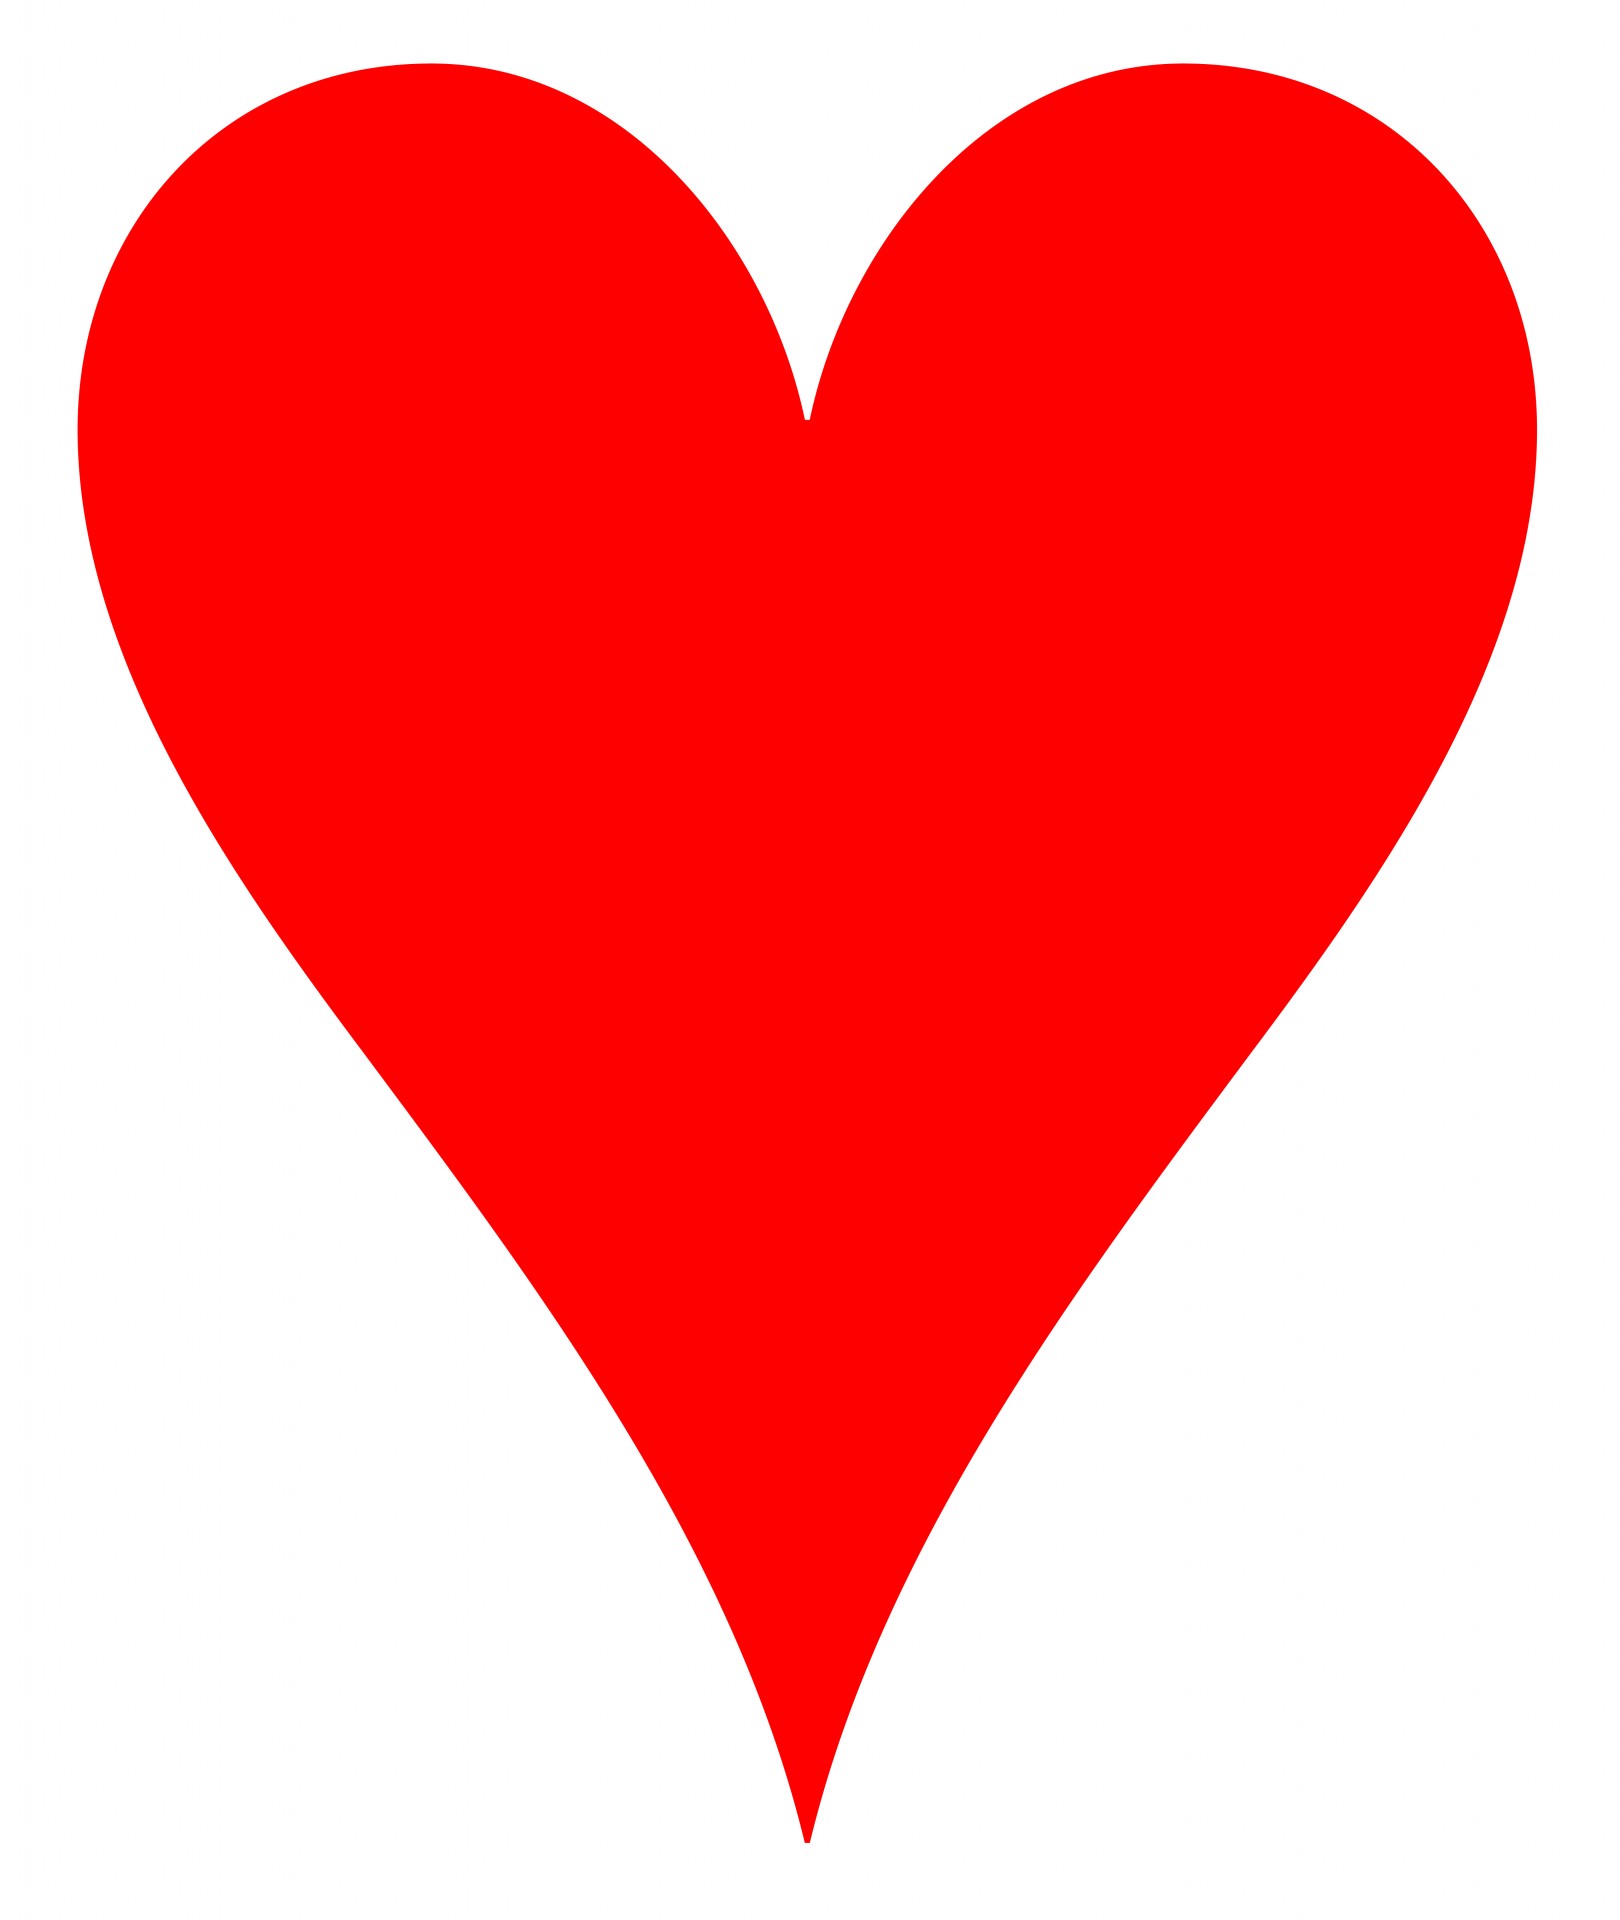 Heart PNG Images, Outline, Emoji, Pink And Red Heart Clipart.